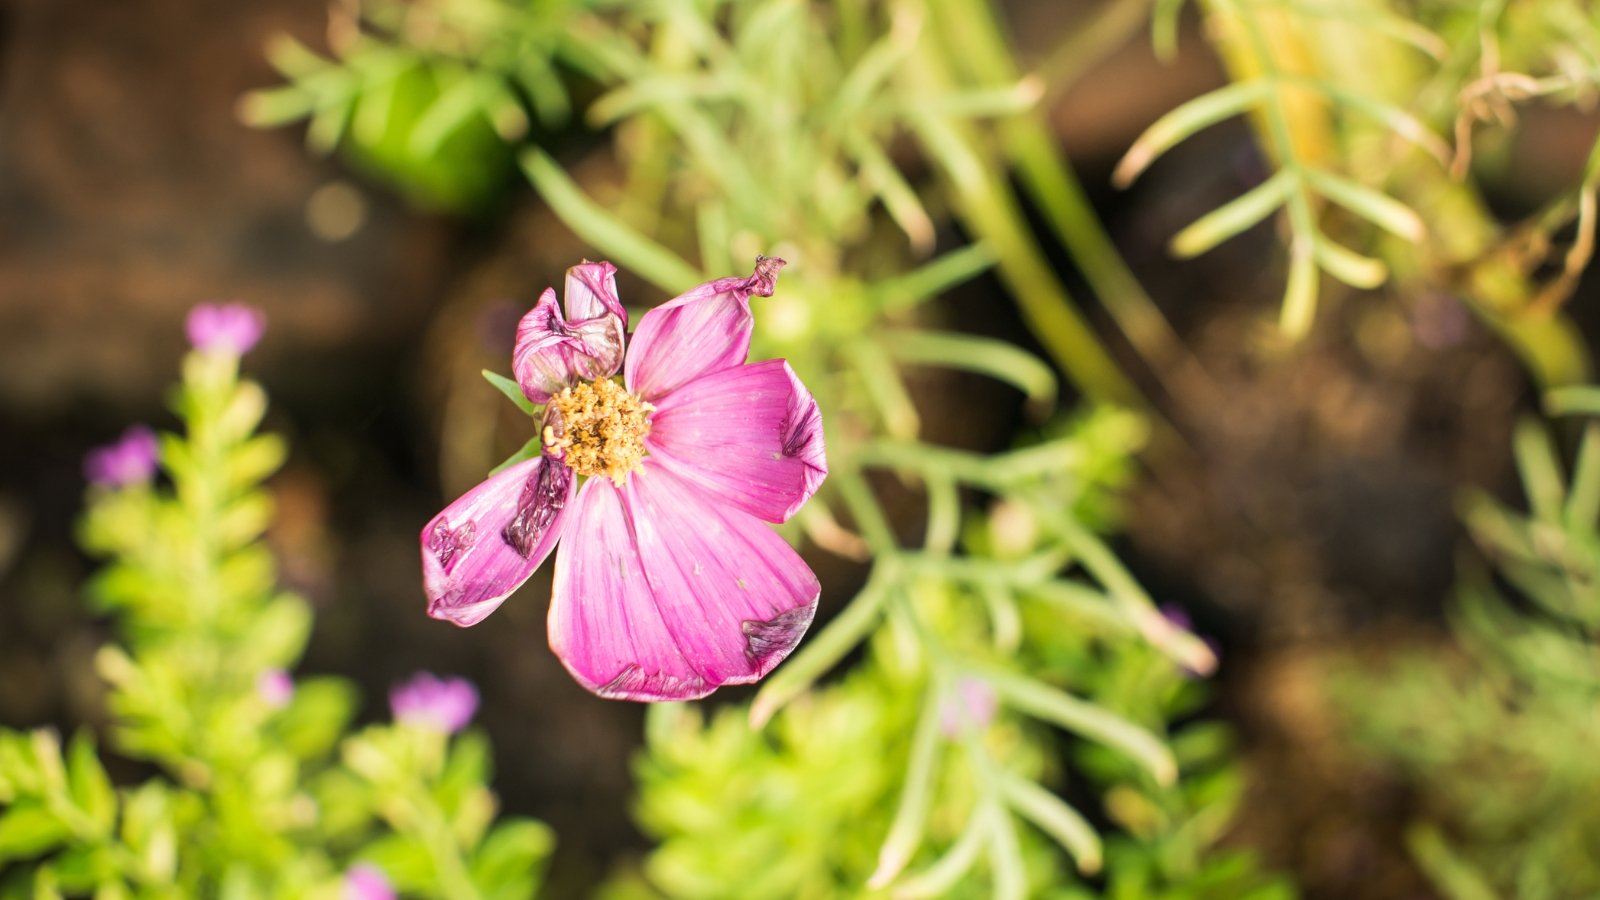 A wilted purple cosmos flower stands out against a background of blurry green foliage, illuminated by the golden rays of the sun, casting a serene ambiance over the scene.